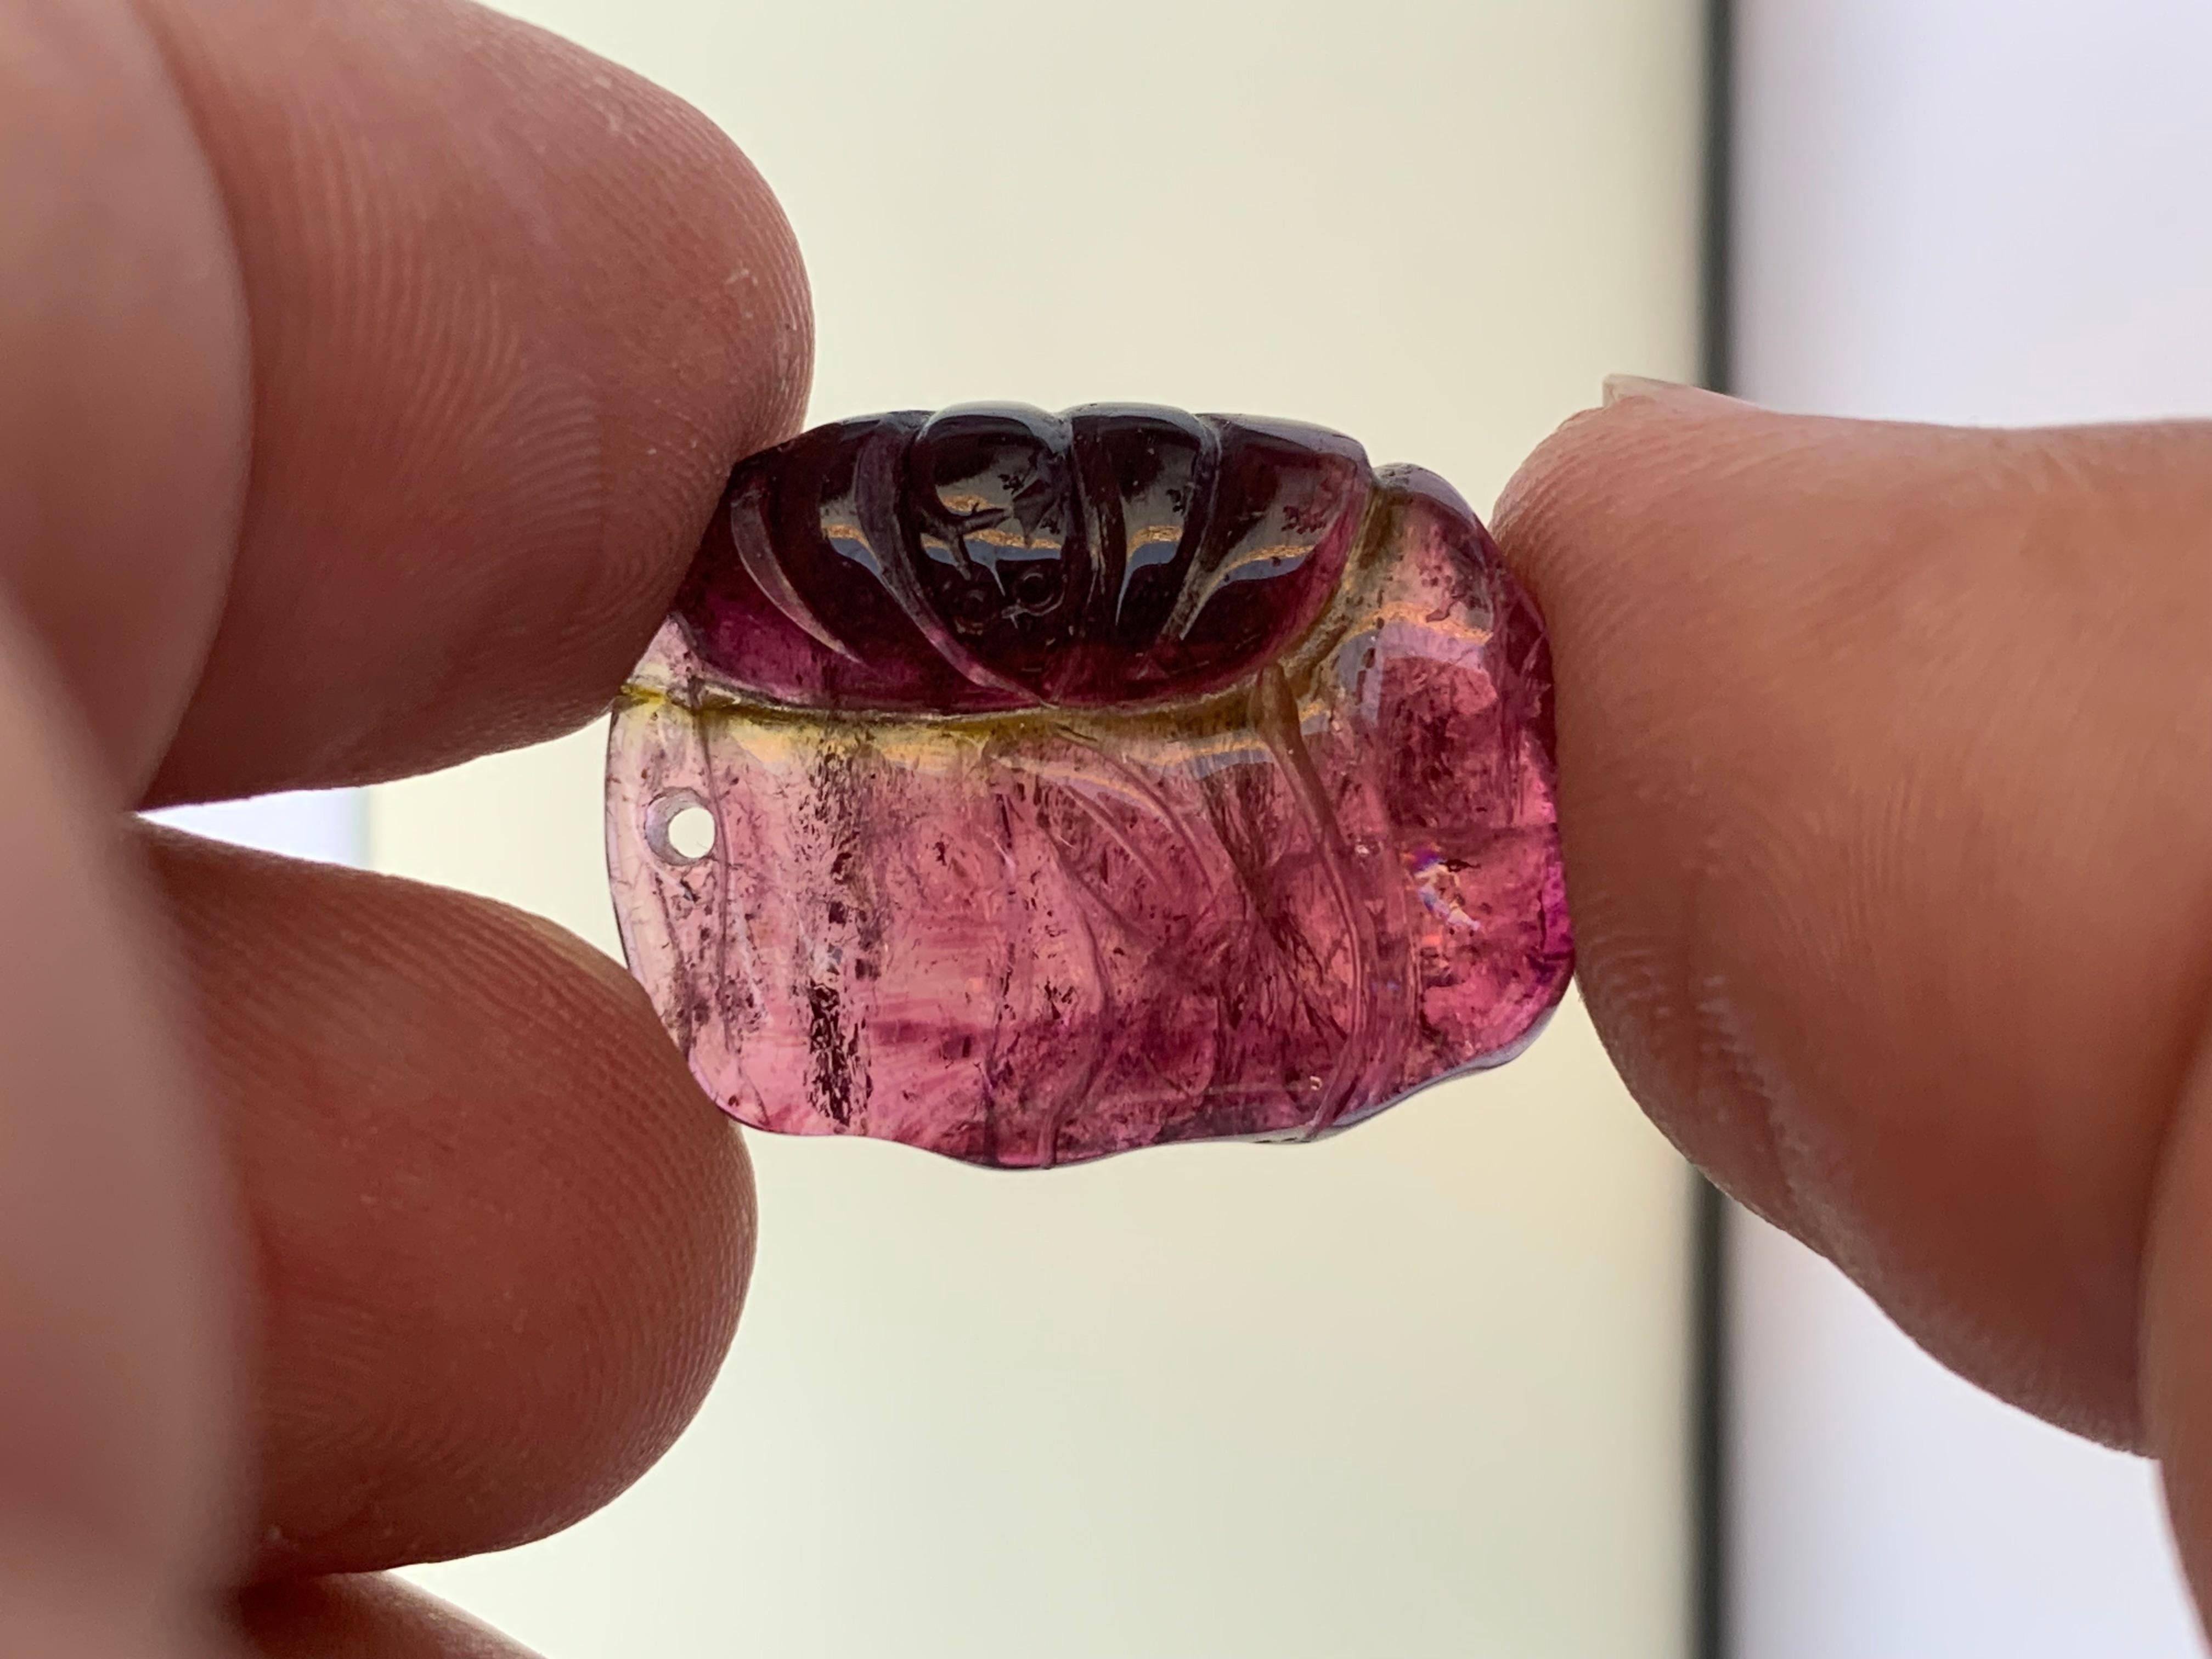 Stunning Loose Tri-Color Tourmaline Drilled Carving From Afghanistan
WEIGHT: 23.85 Carat
DIMENSIONS: 2.2 x 1.7 x 0.8 Cm
ORIGIN: Madagascar, Africa 
TYPE: Carving 
COLOR : Red, Green And Pink
TREATMENT: None

Tourmaline is an extremely